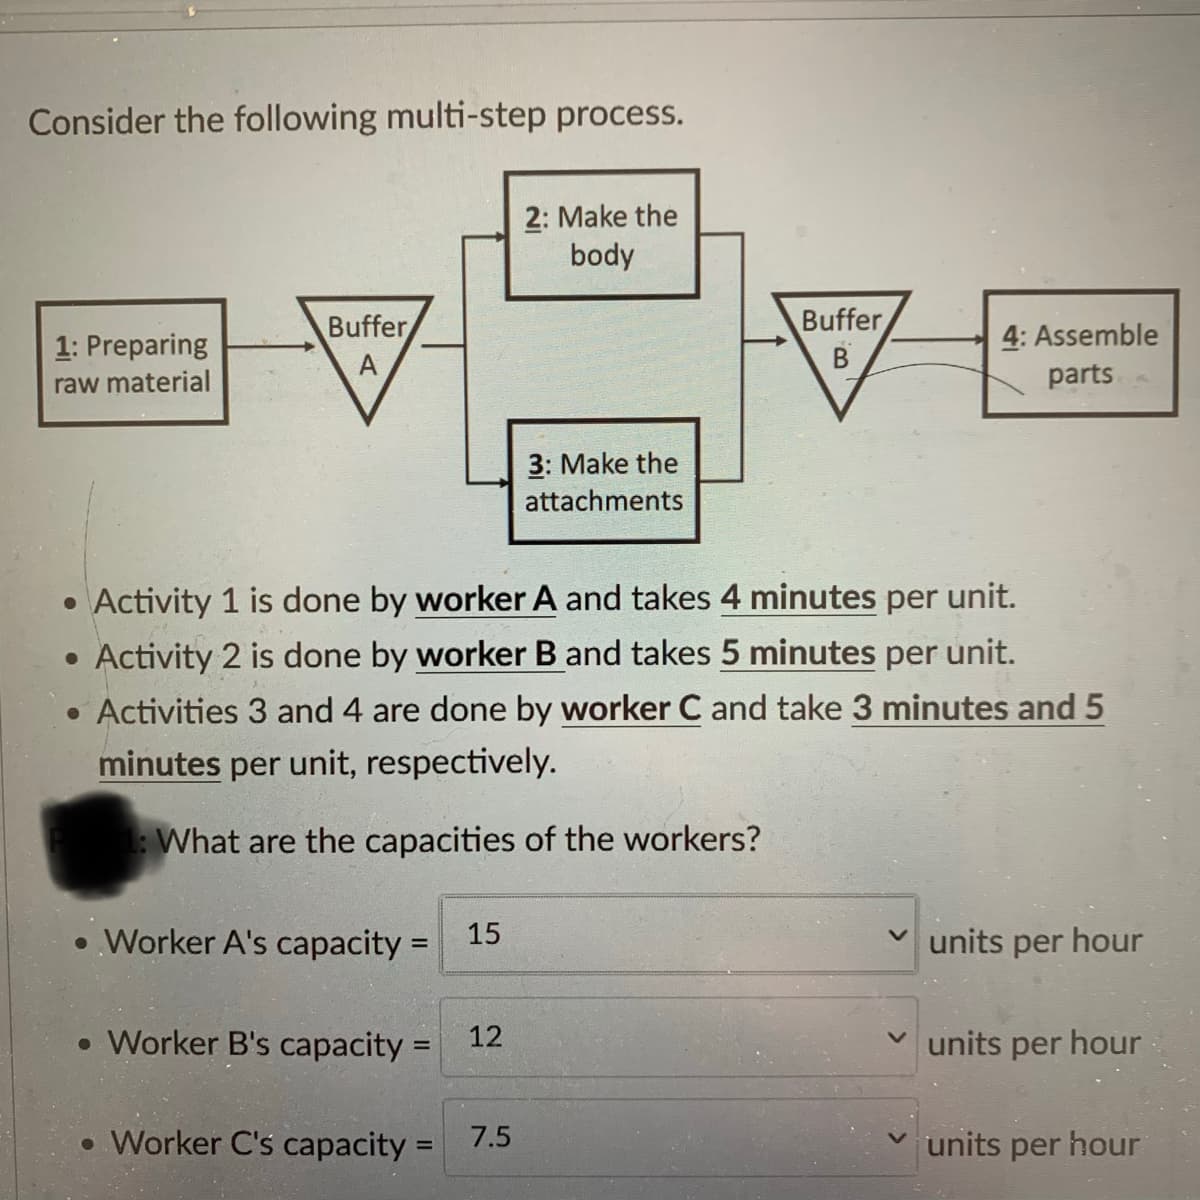 Consider the following multi-step process.
1: Preparing
raw material
Buffer
A
●
• Worker A's capacity =
• Worker B's capacity =
• Activity 1 is done by worker A and takes 4 minutes per unit.
Activity 2 is done by worker B and takes 5 minutes per unit.
• Activities 3 and 4 are done by worker C and take 3 minutes and 5
minutes per unit, respectively.
1: What are the capacities of the workers?
• Worker C's capacity=
15
12
2: Make the
body
7.5
3: Make the
attachments
Buffer
B
4: Assemble
parts
✓units per hour
units per hour
units per hour